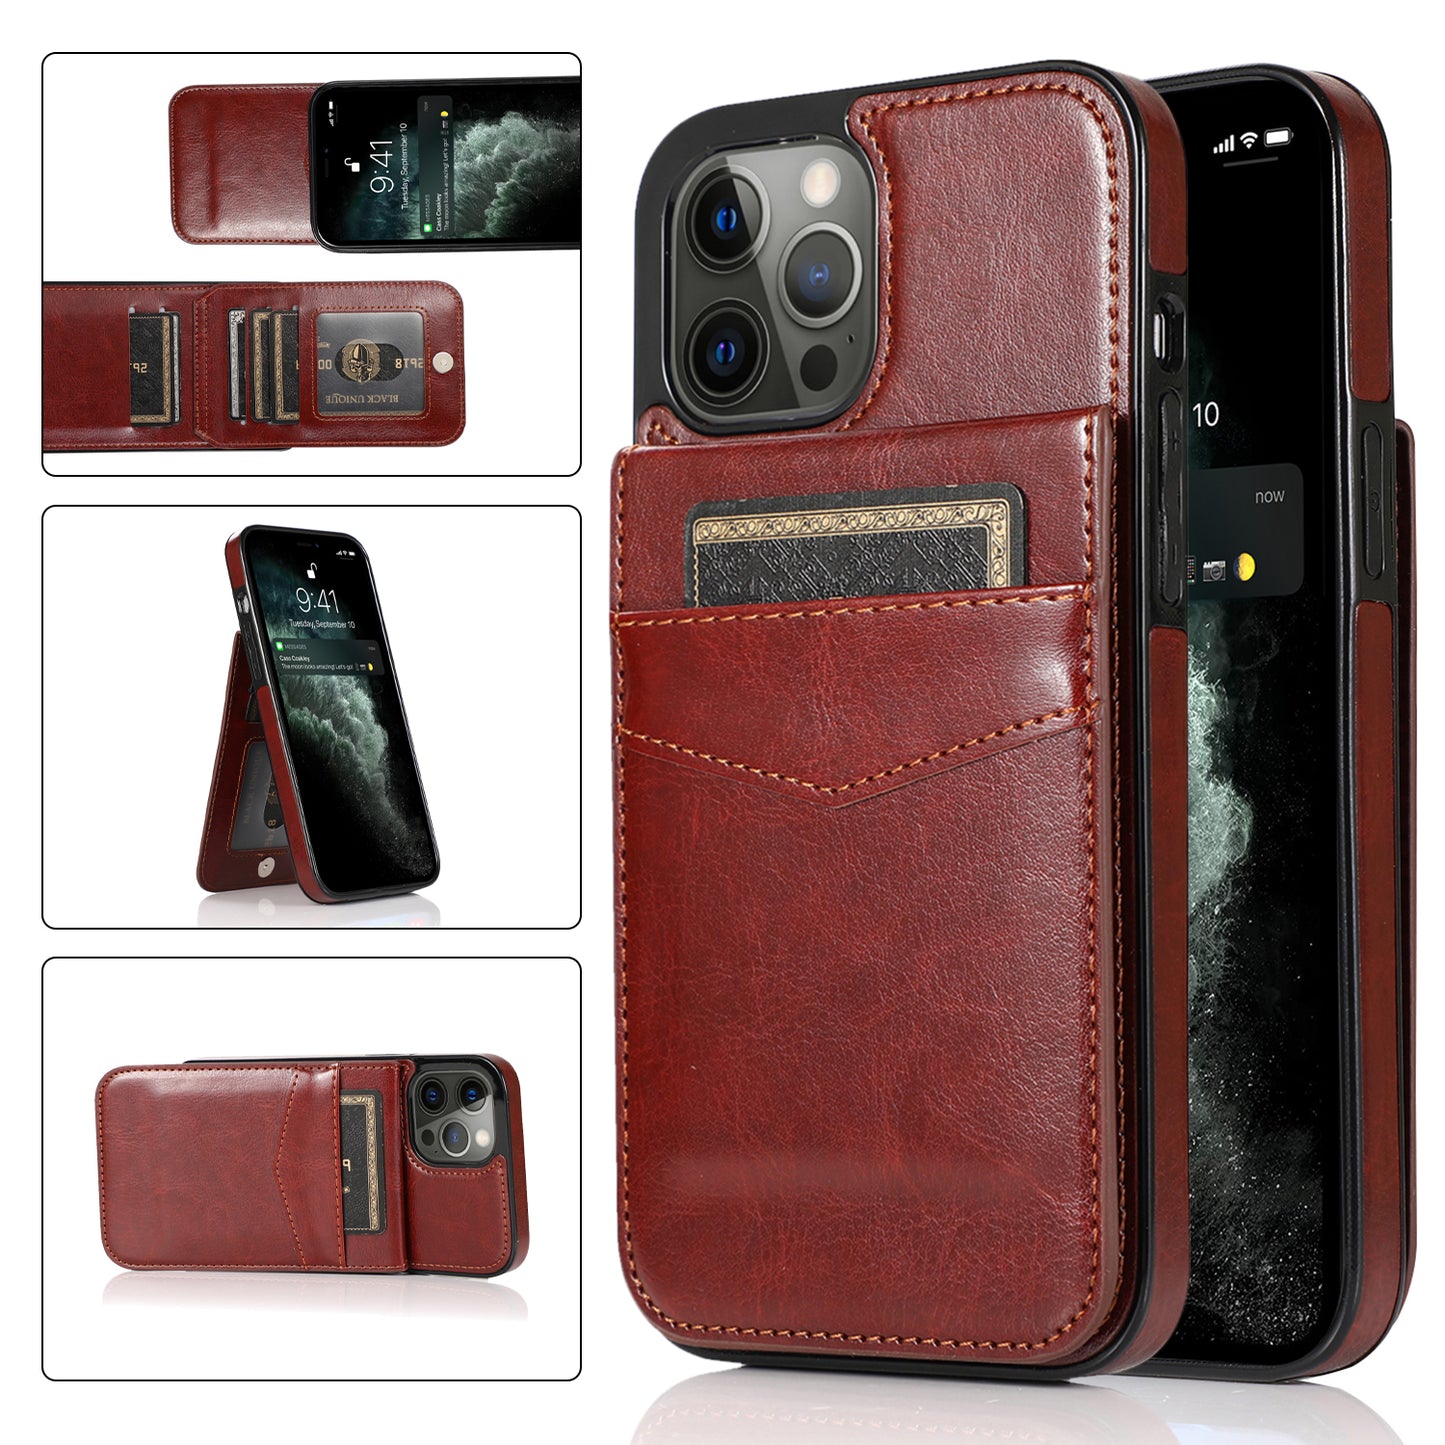 Apple iPhone 12 Pro Max Leather Cover Vertical Horiznatal Kickstand with Card Slots